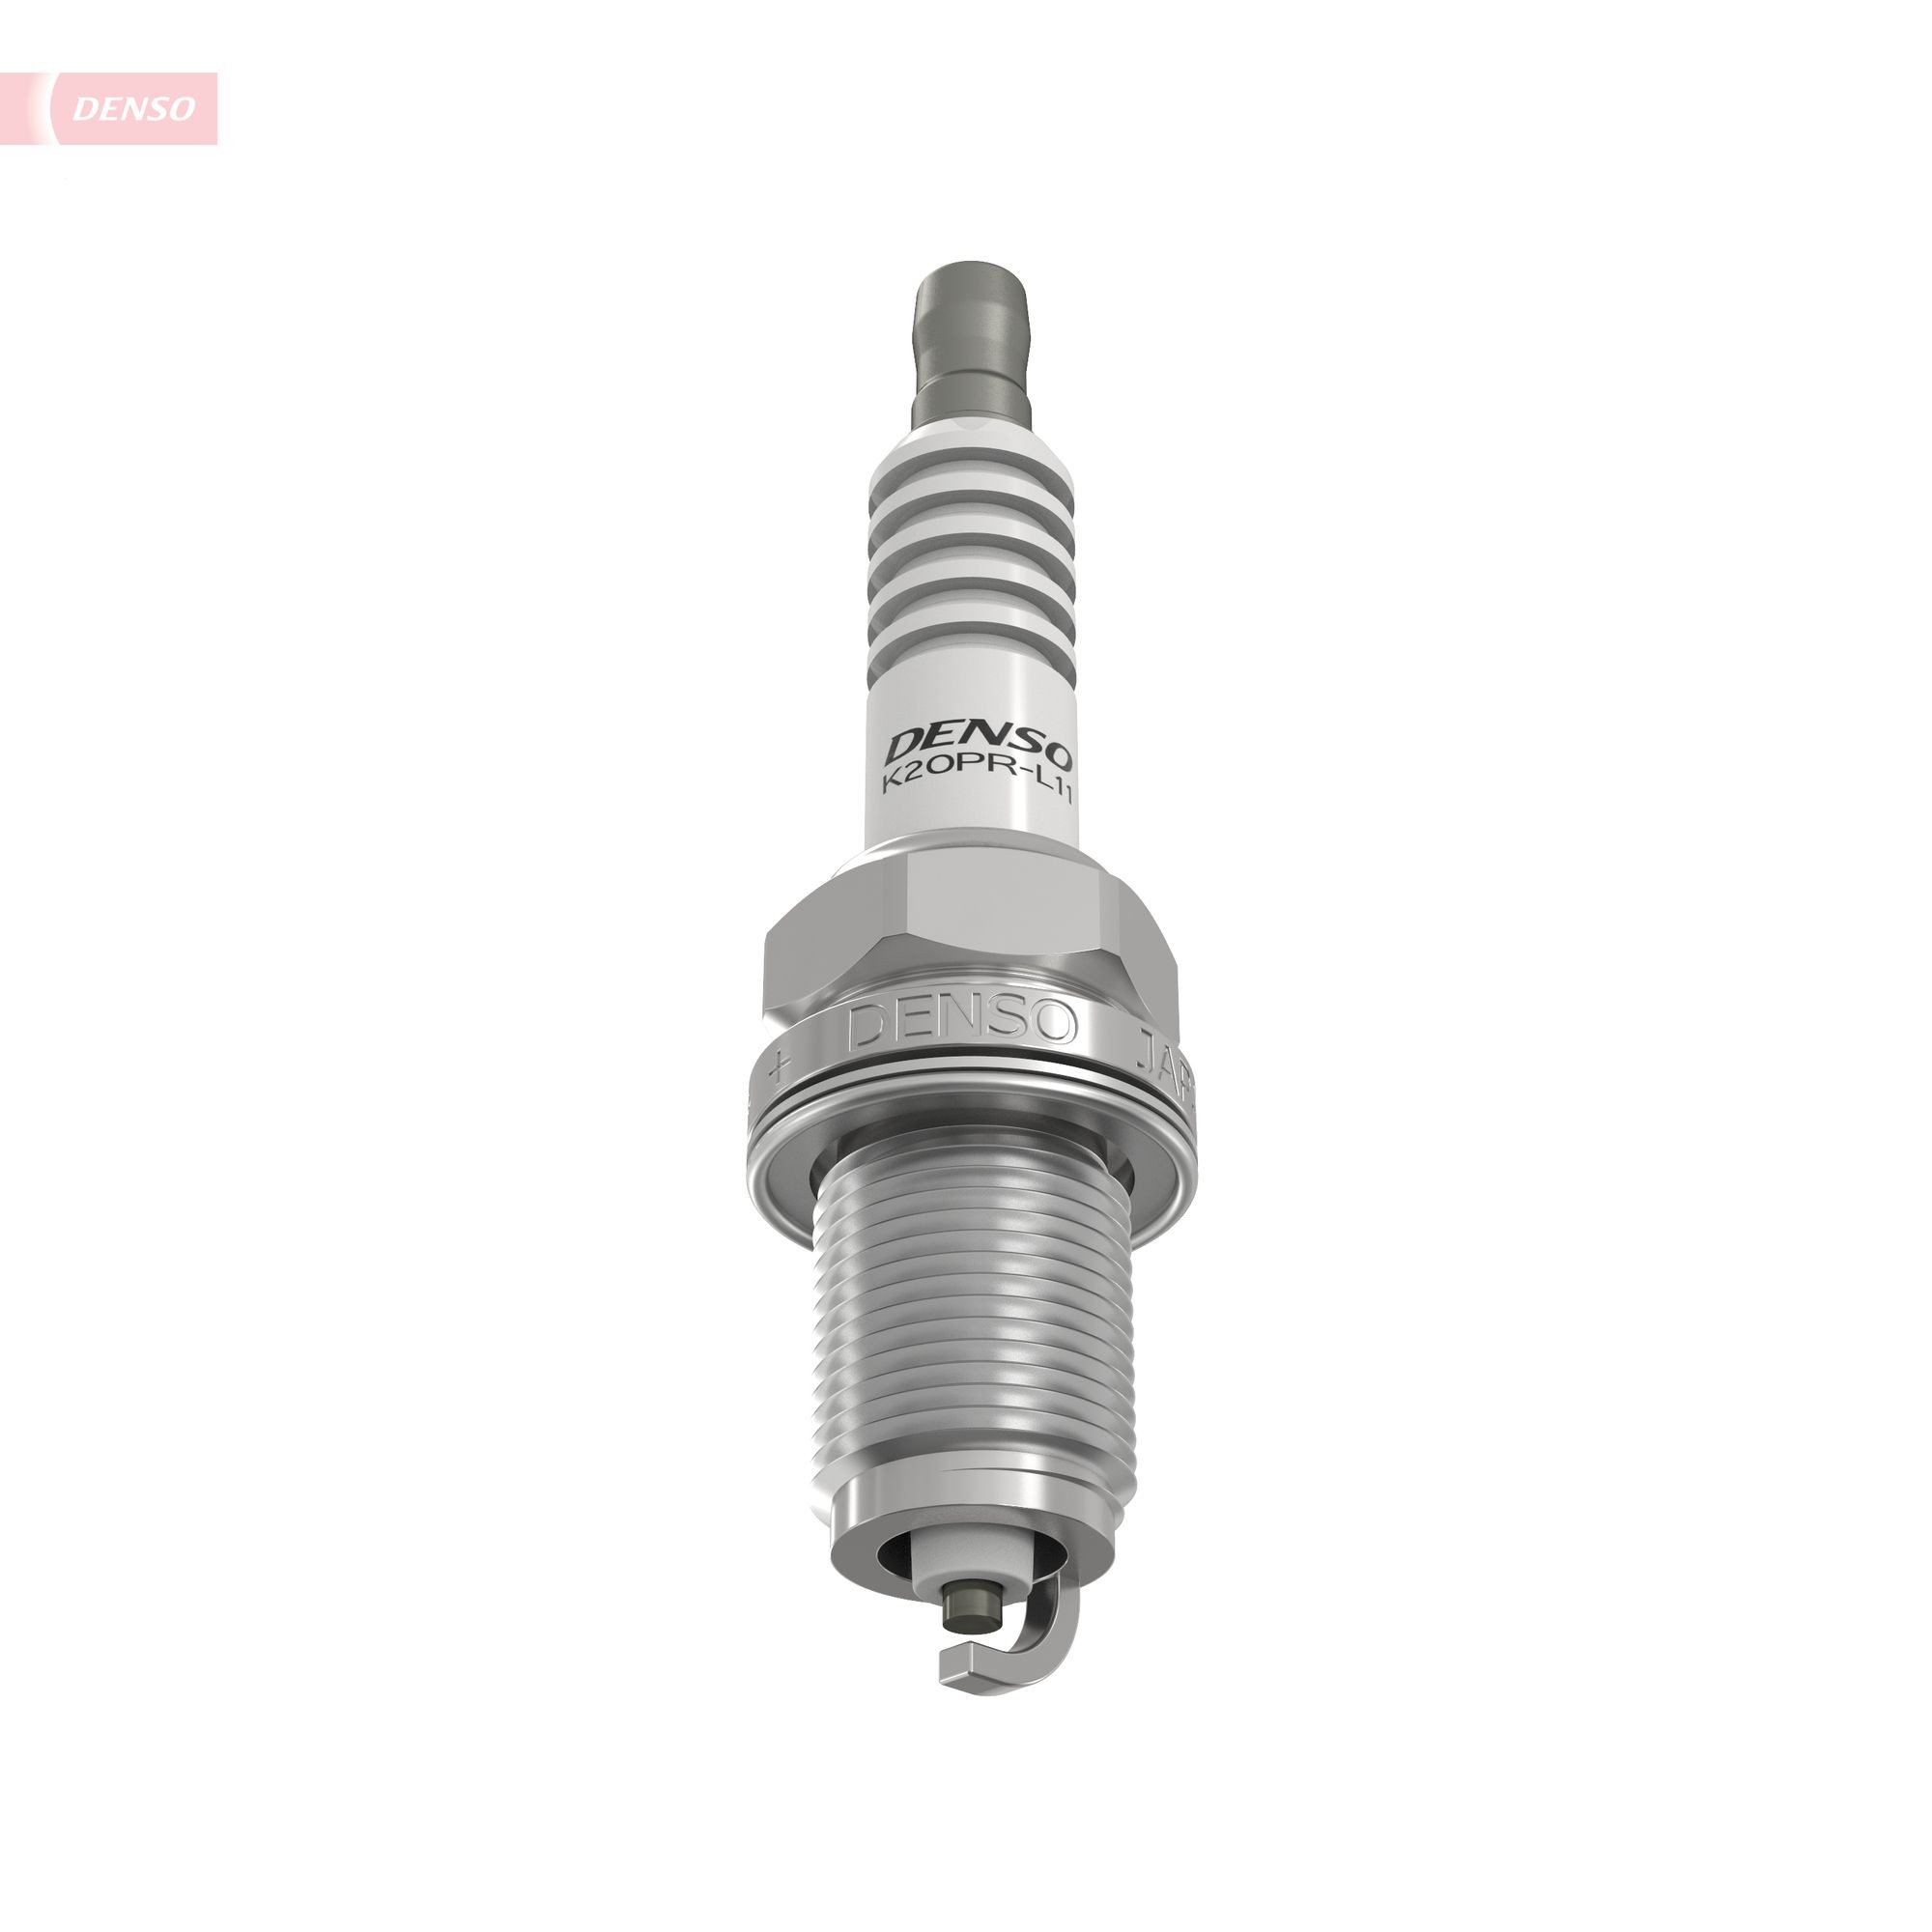 K20PRL11 Spark plug DENSO D117 review and test